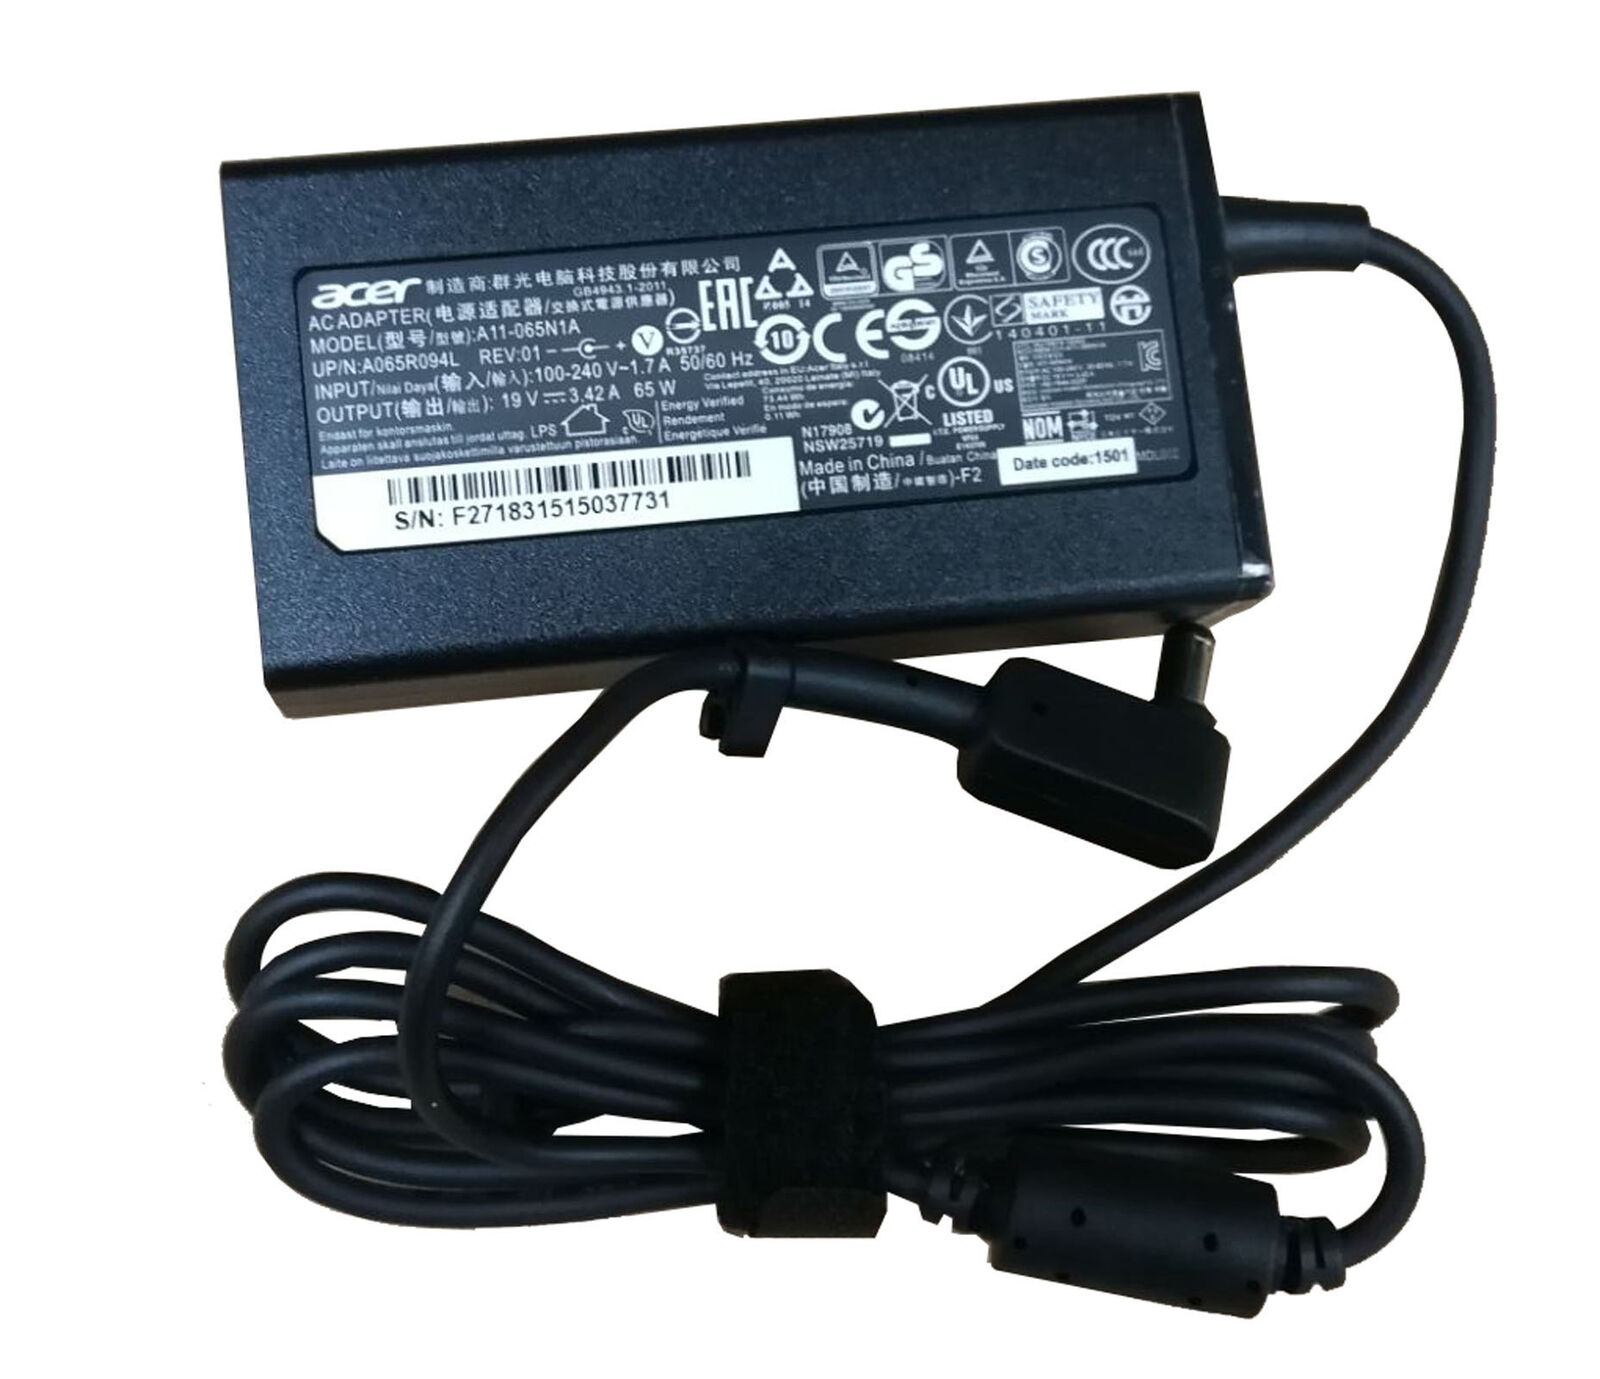 65W Acer Aspire S7-393 Charger AC Adapter Power Cord